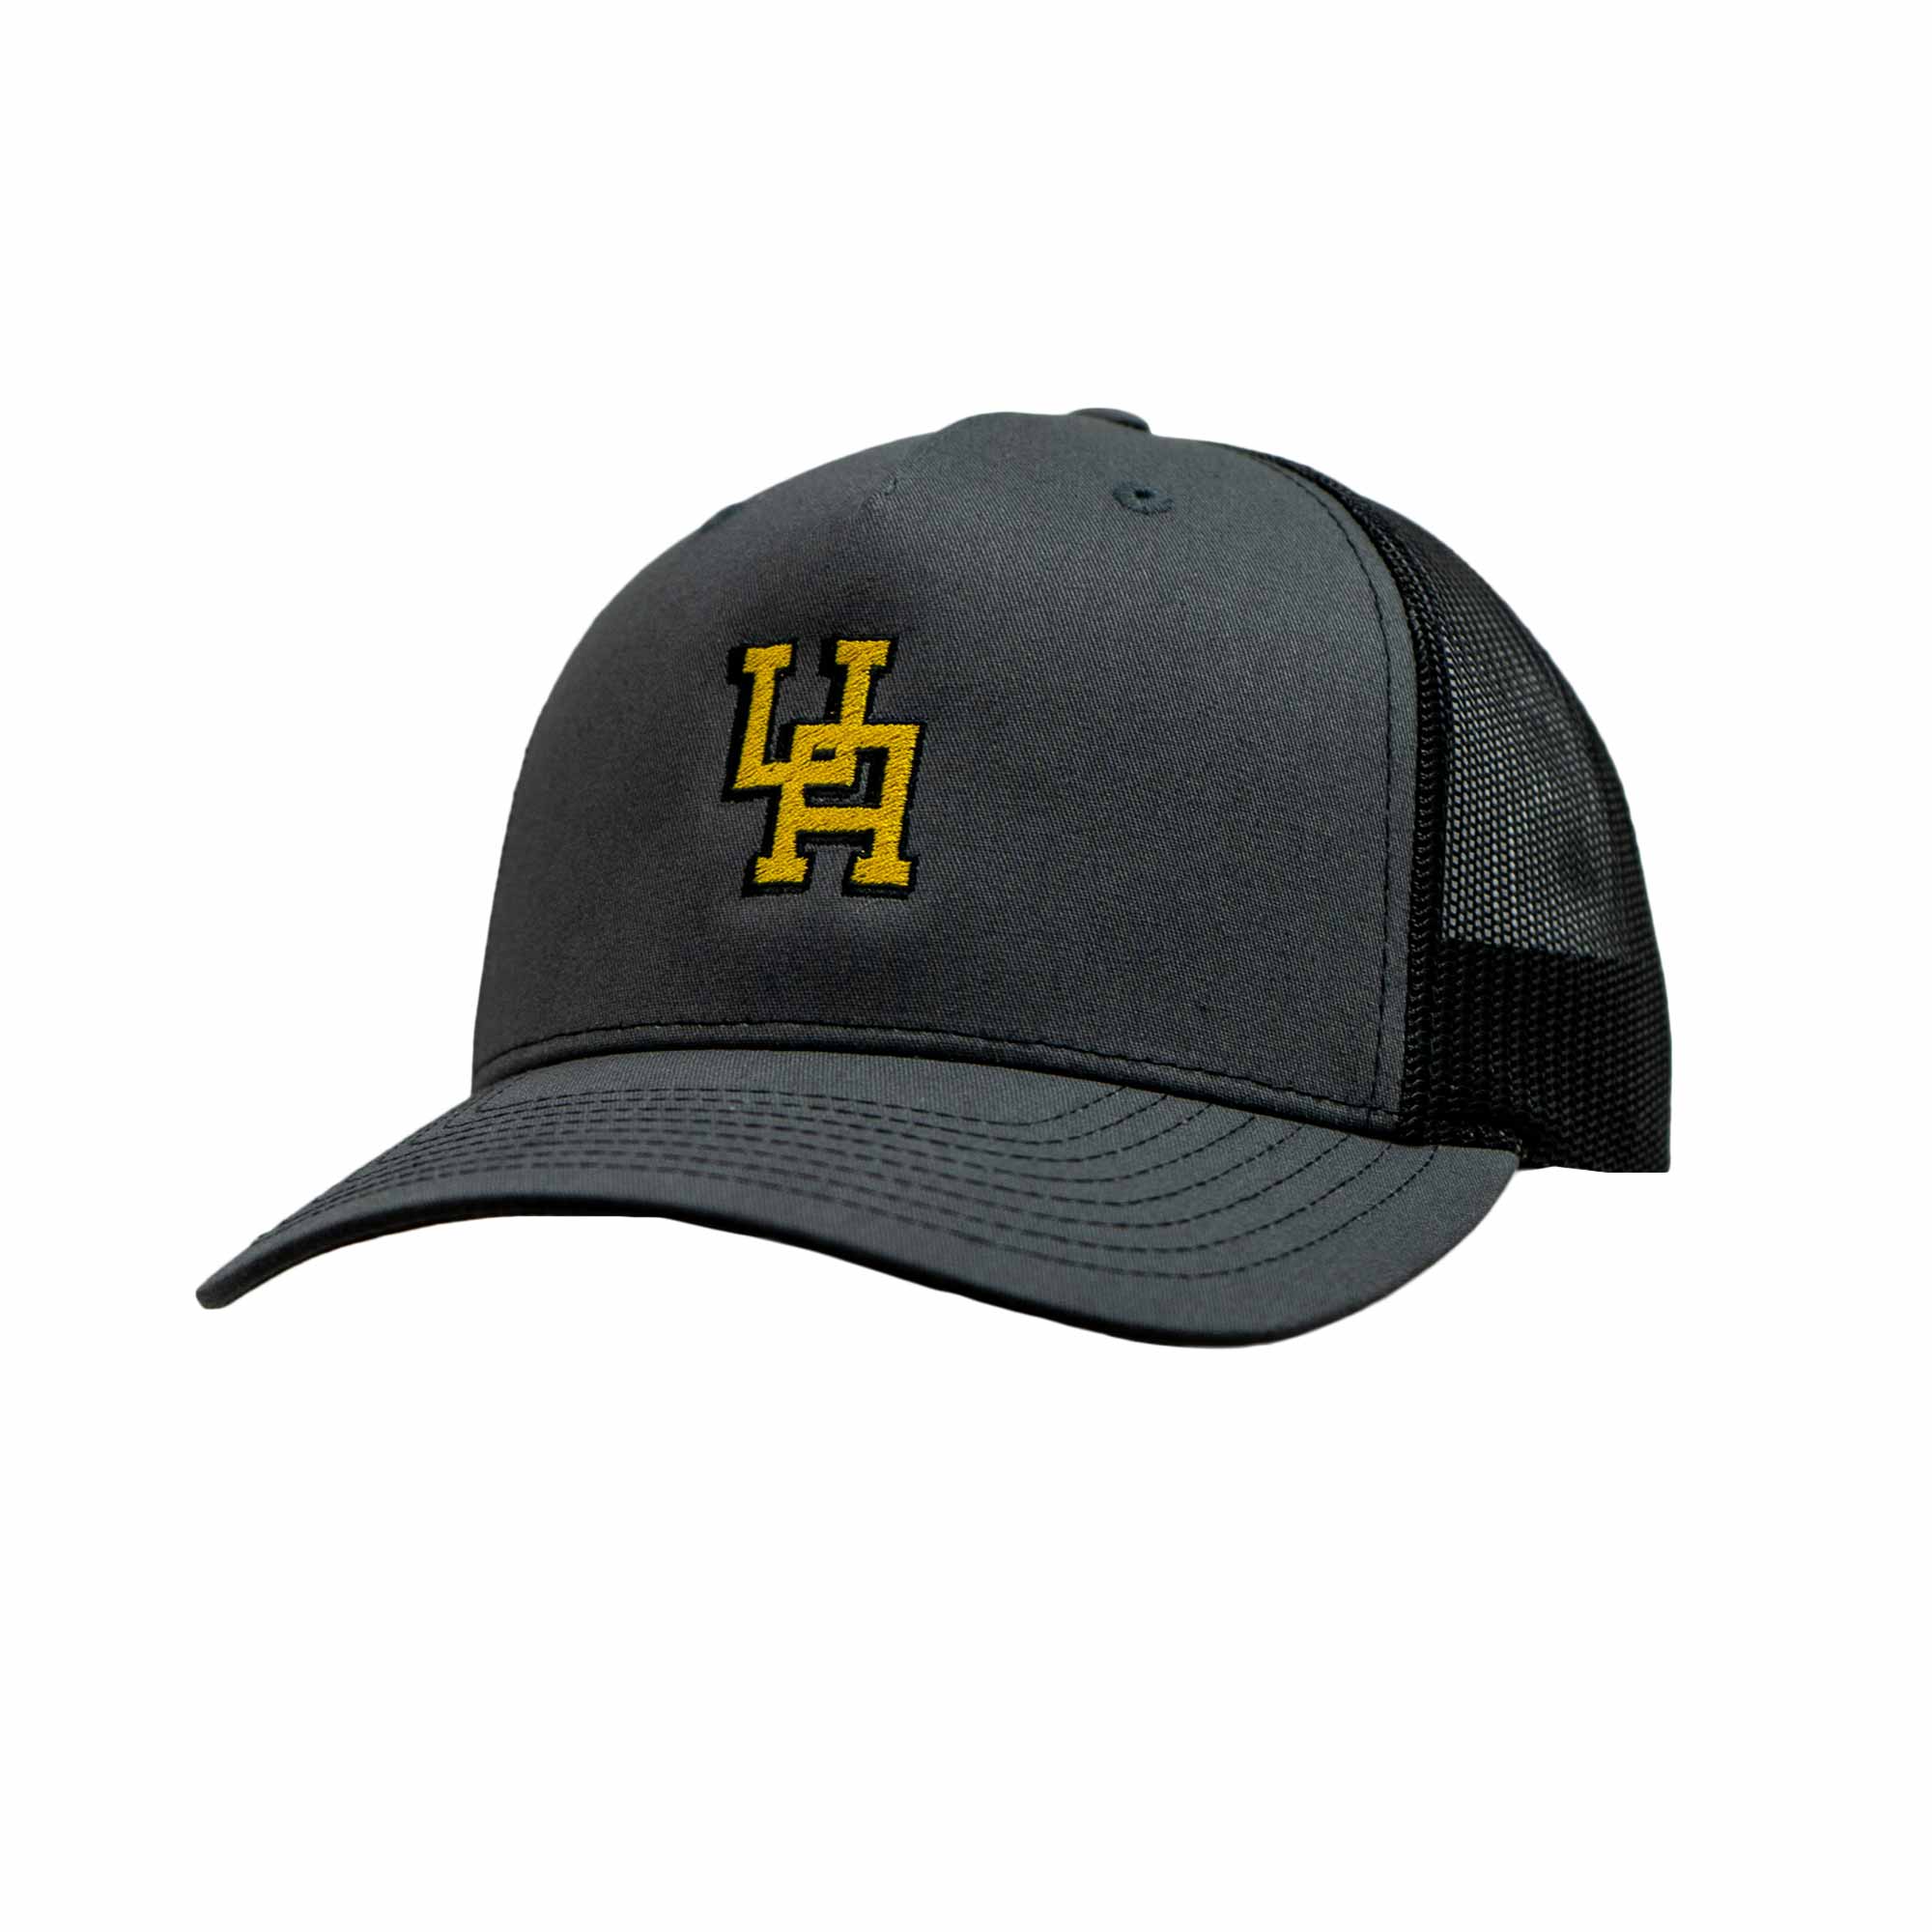 Upper Arlington embroidered UA structured 5 panel trucker hat. Officially Licensed and embroidered in Upper Arlington. Colors: Charcoal/Black